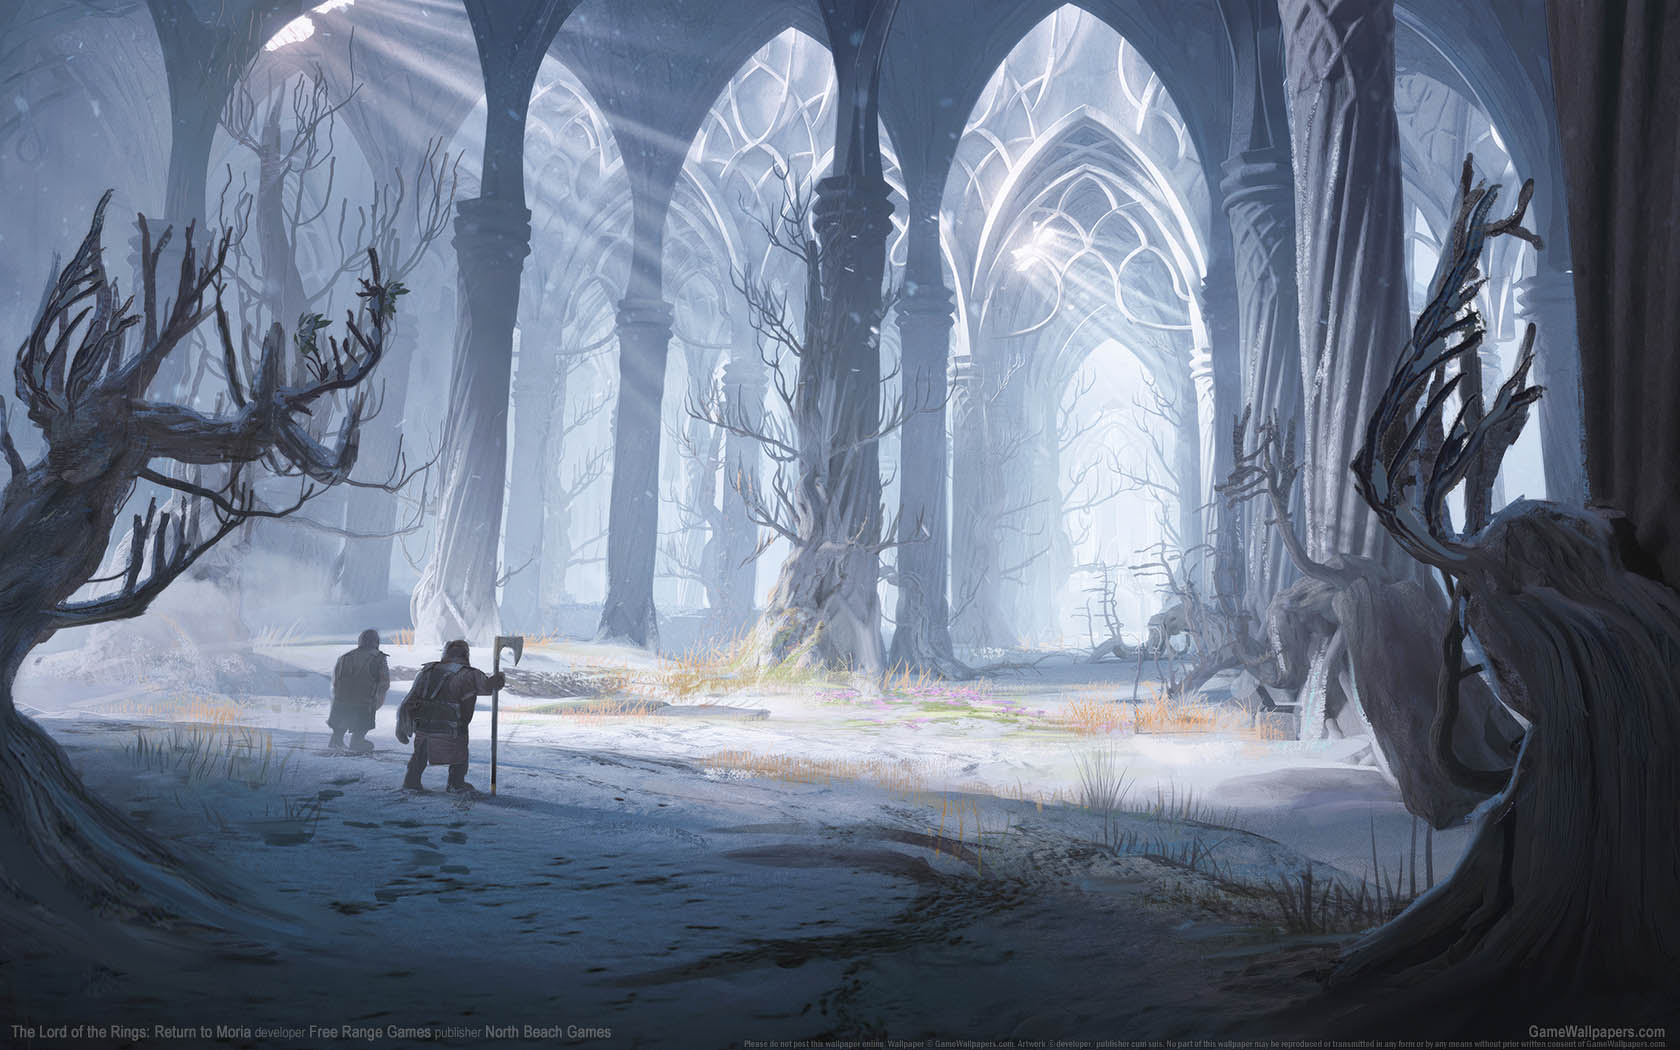 The Lord of the Rings: Return to Moria fond d'cran 06 1680x1050